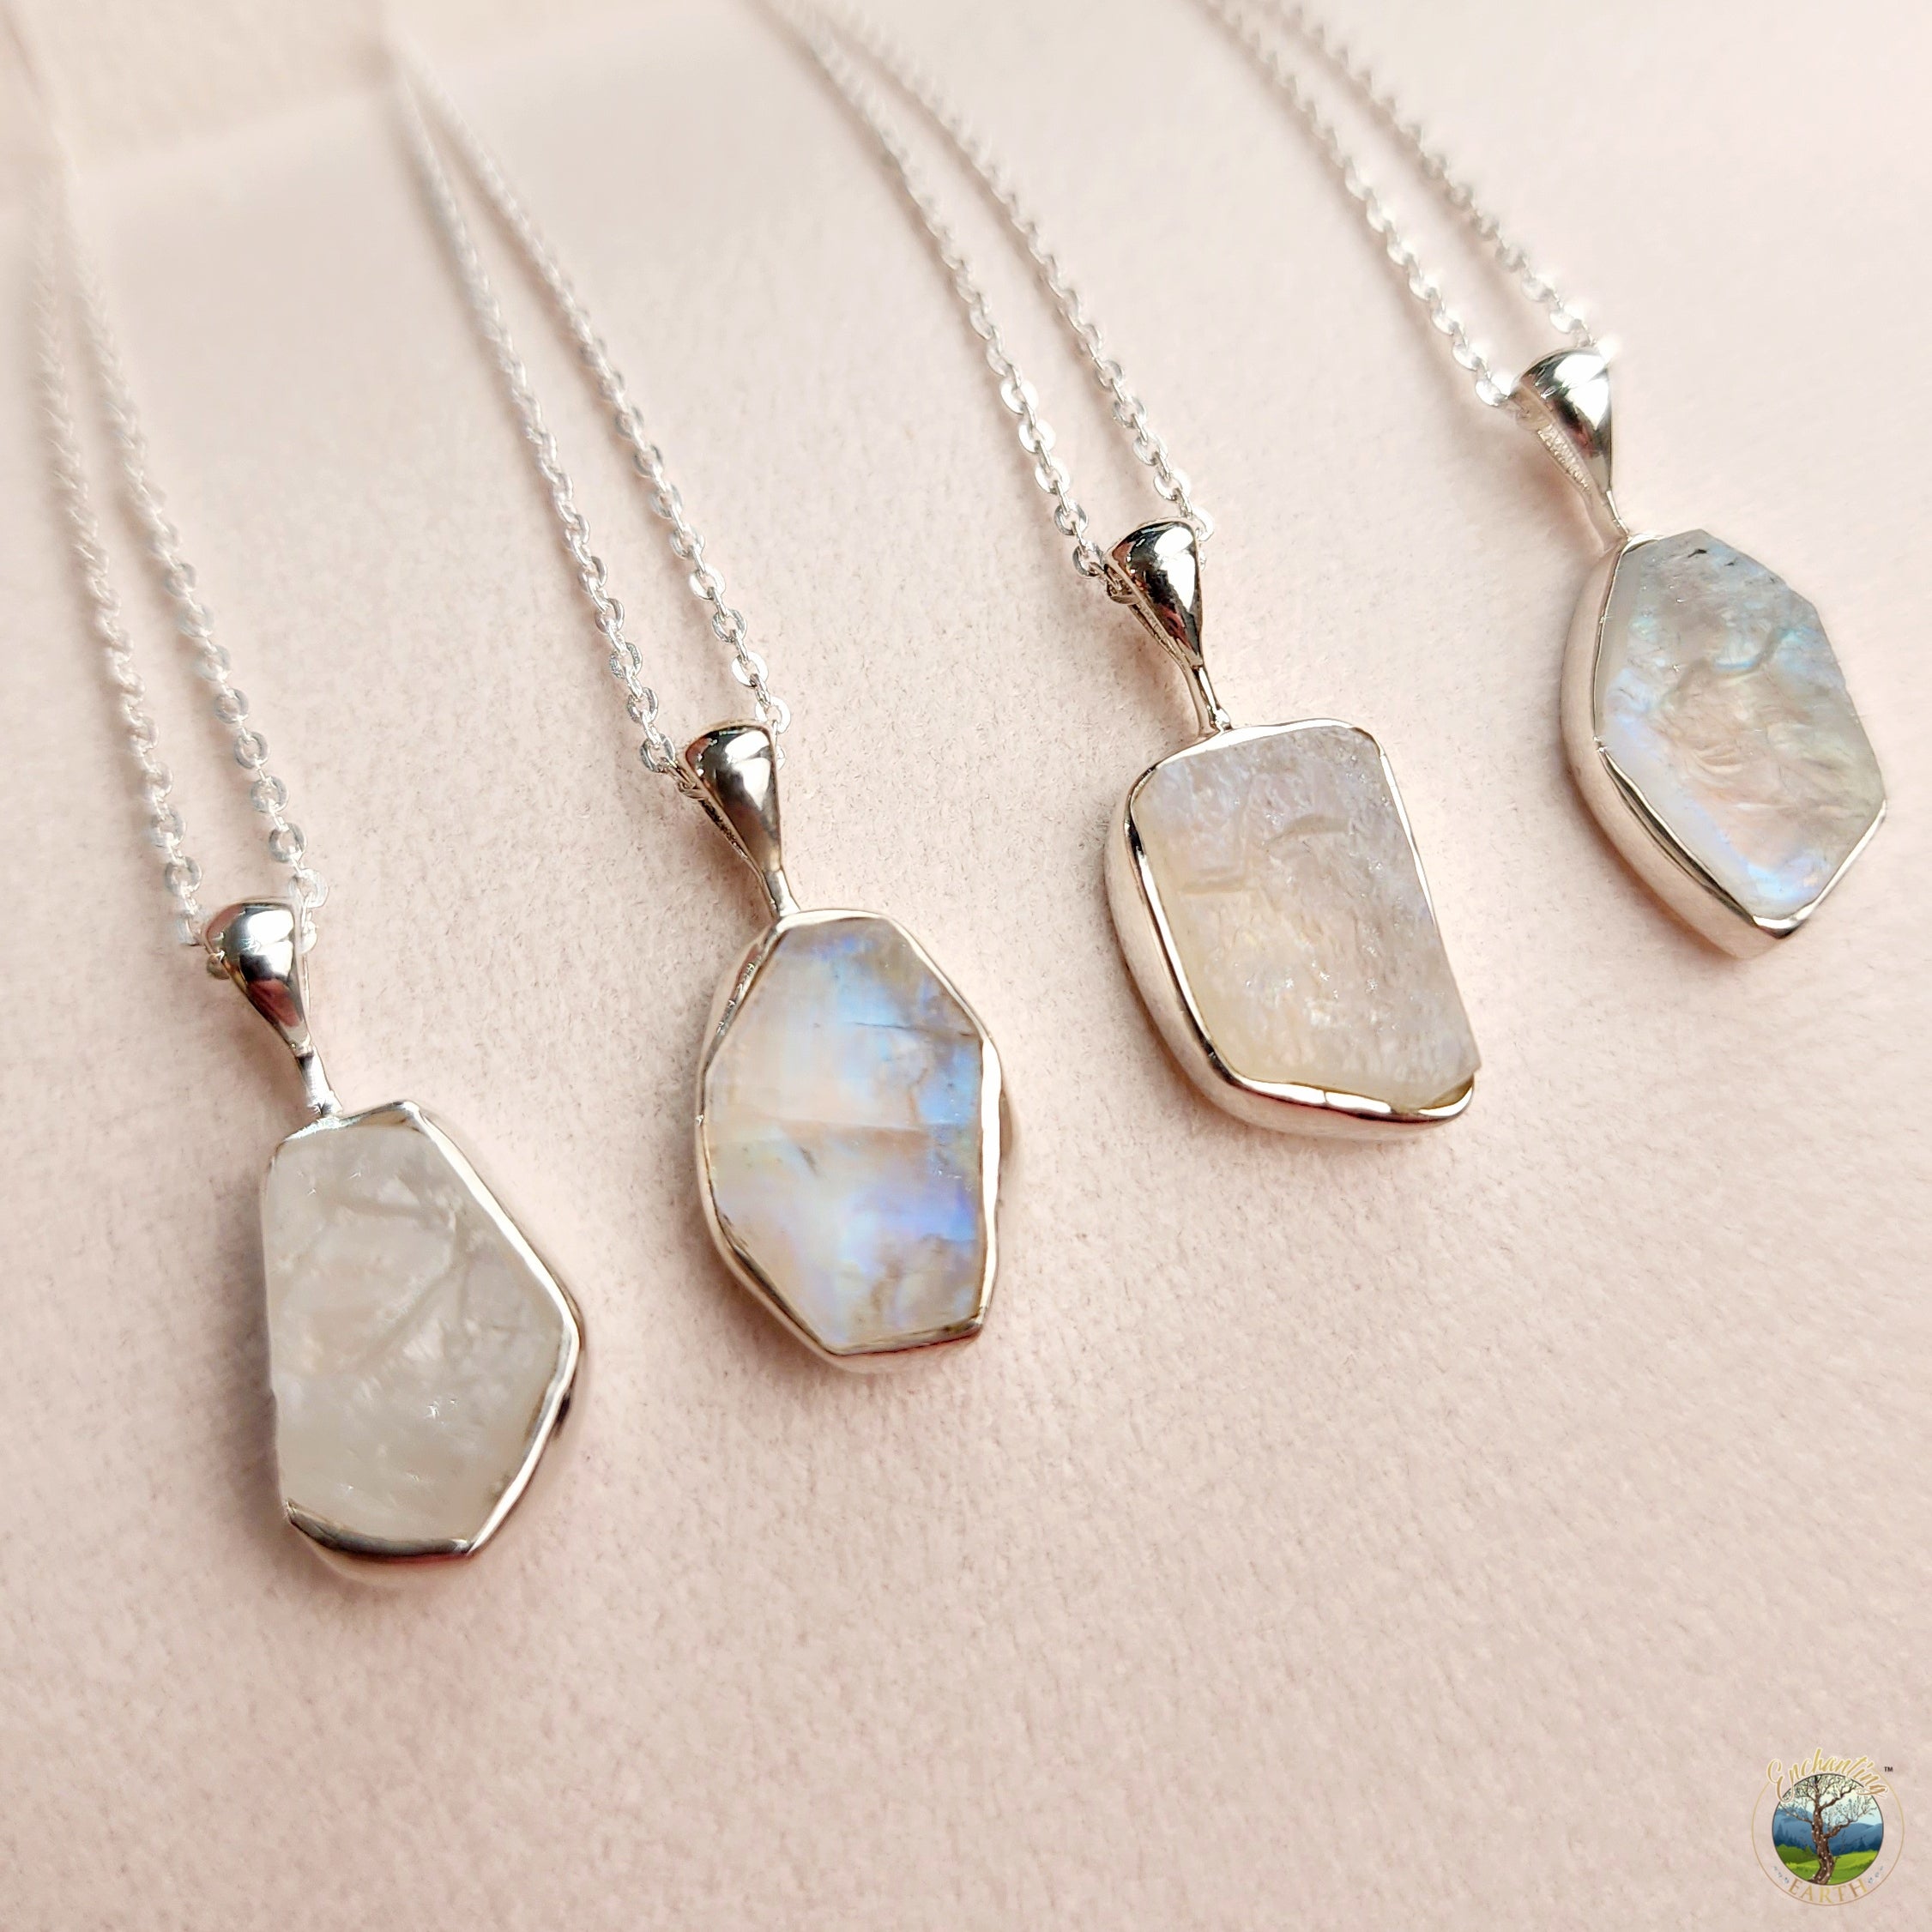 Rainbow Moonstone Raw Necklace .925 Silver for Intuition and New Beginnings